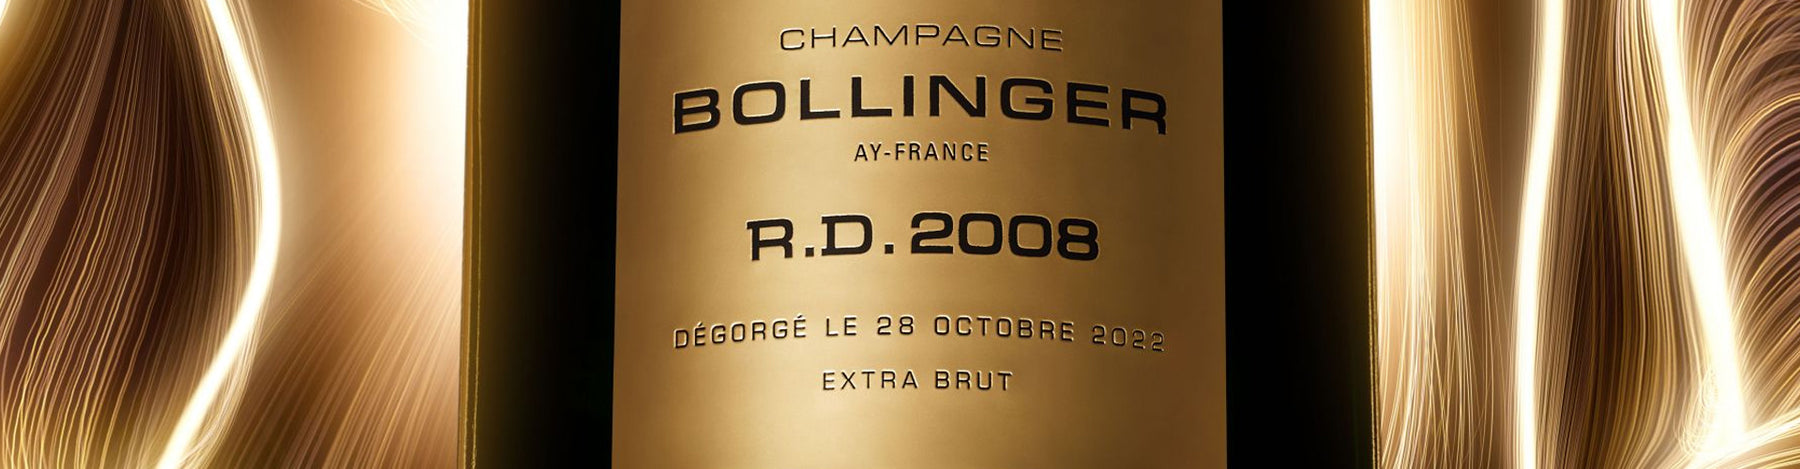 Great Results For Bollinger R.D. 2008 At WFW